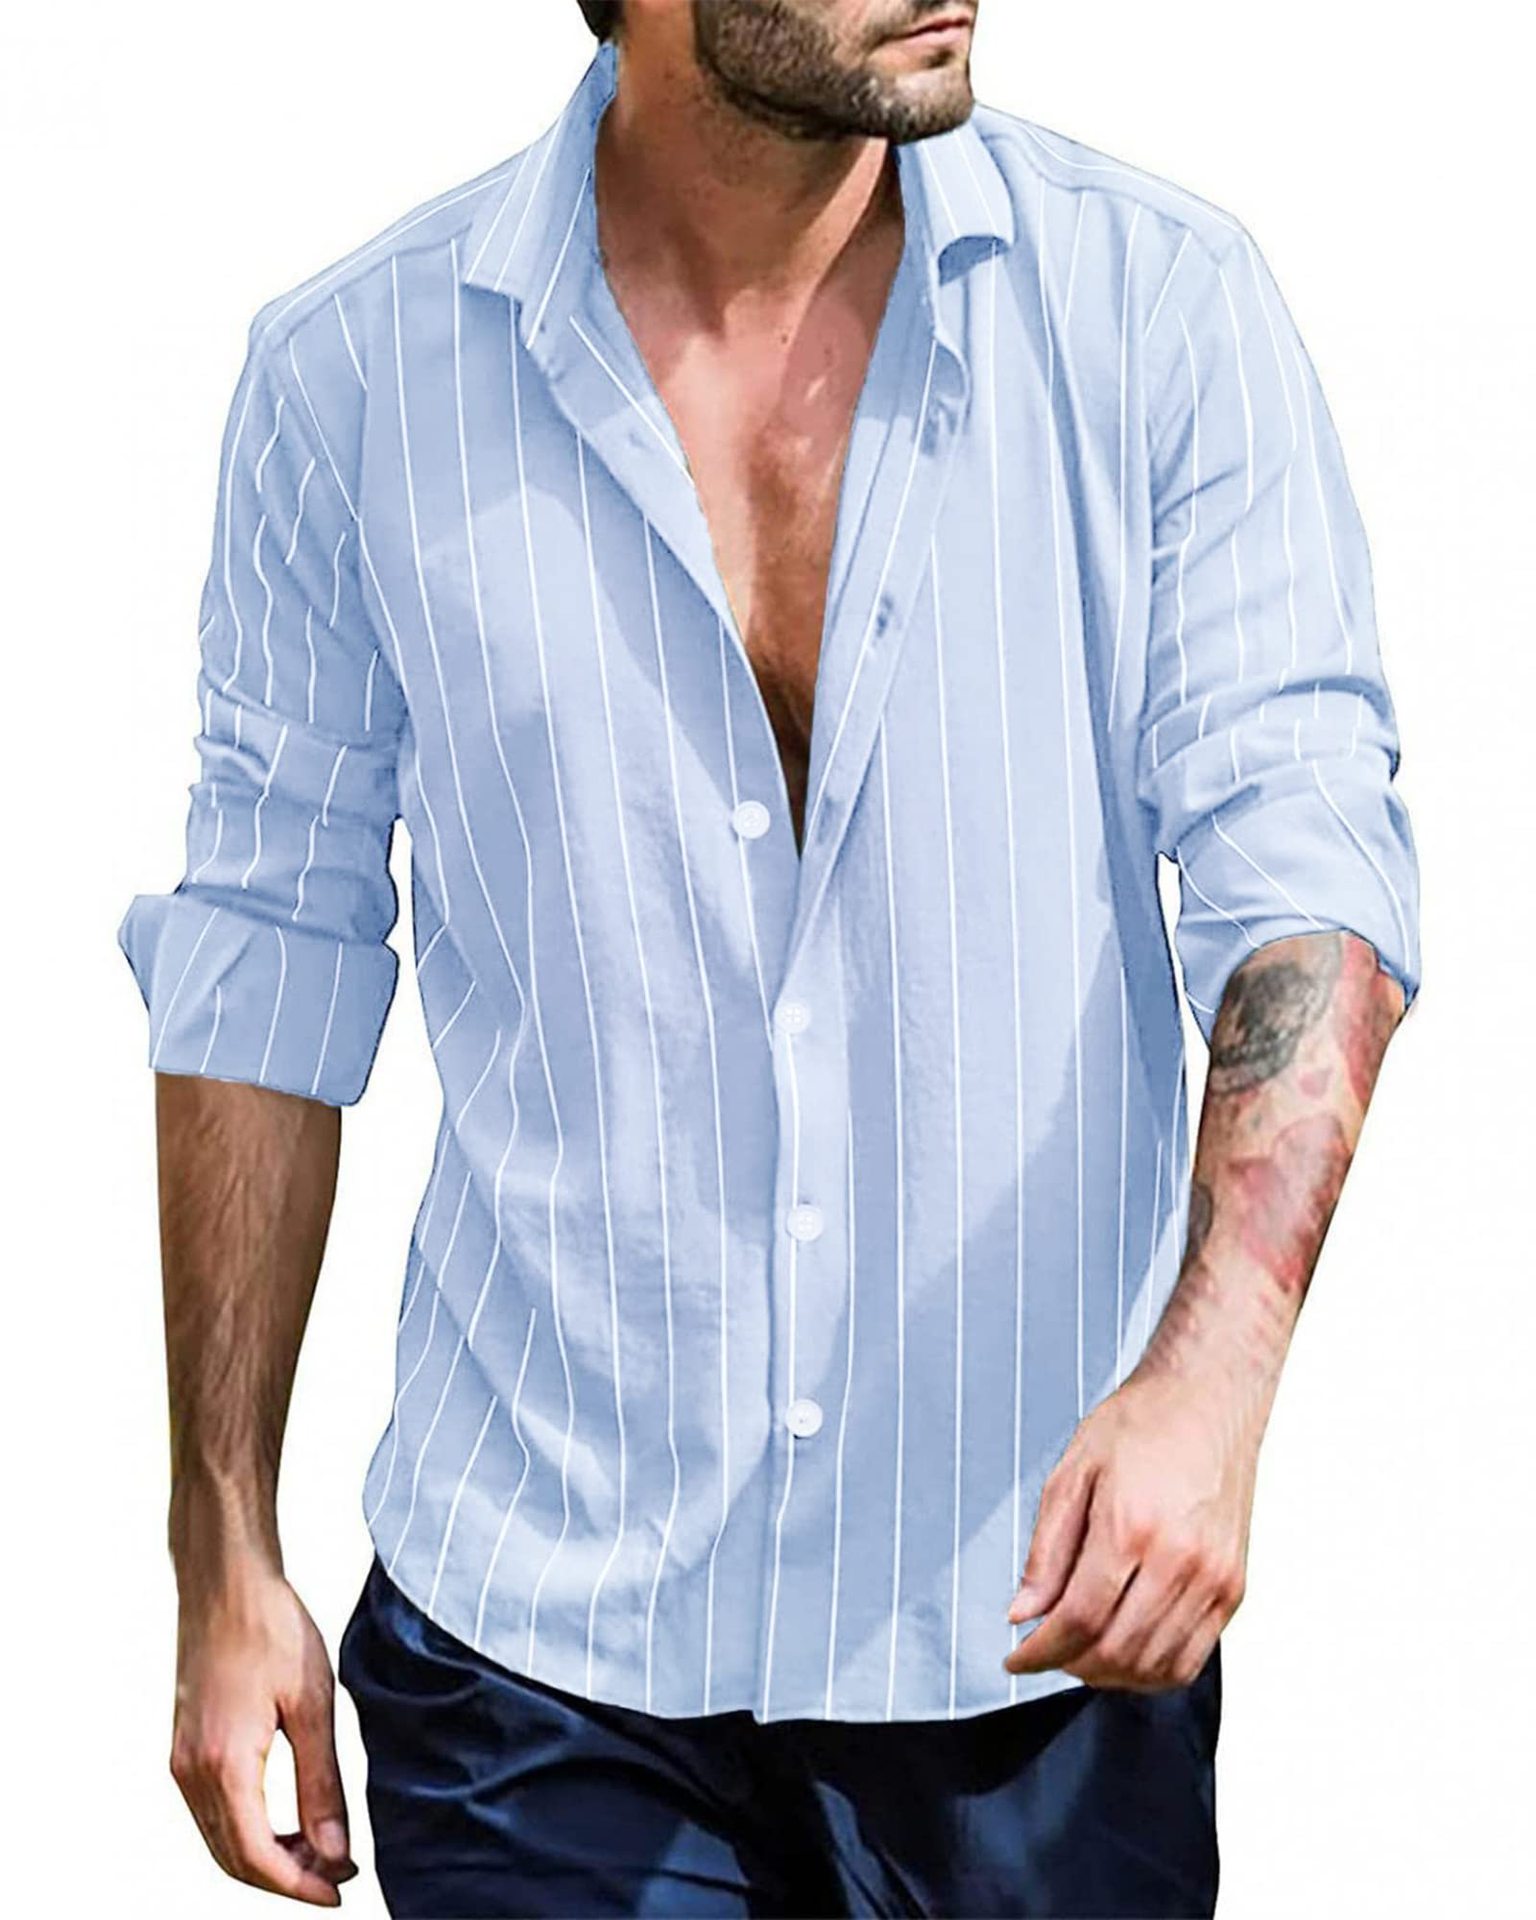 Men's Solid Color Casual Chic Long Sleeve Striped Shirt